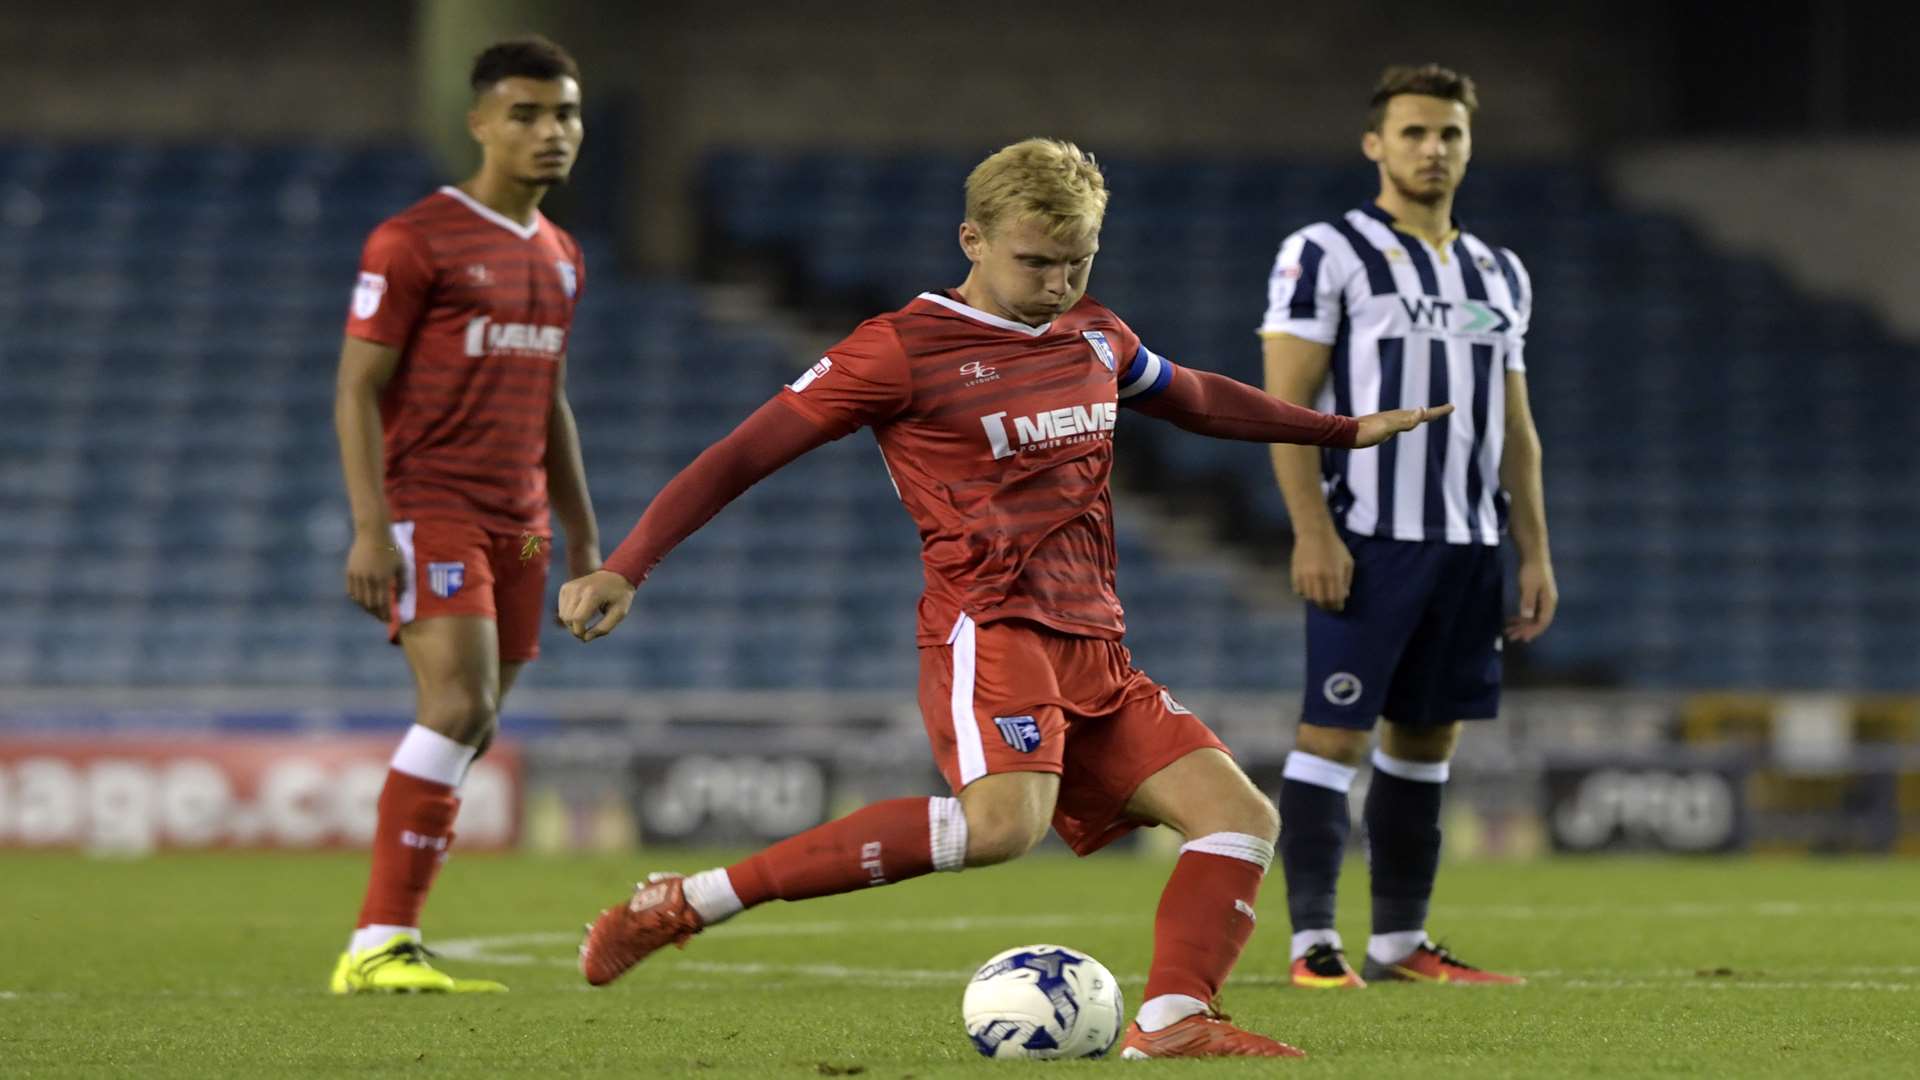 Gills skipper Josh Wright on the ball Picture: Barry Goodwin